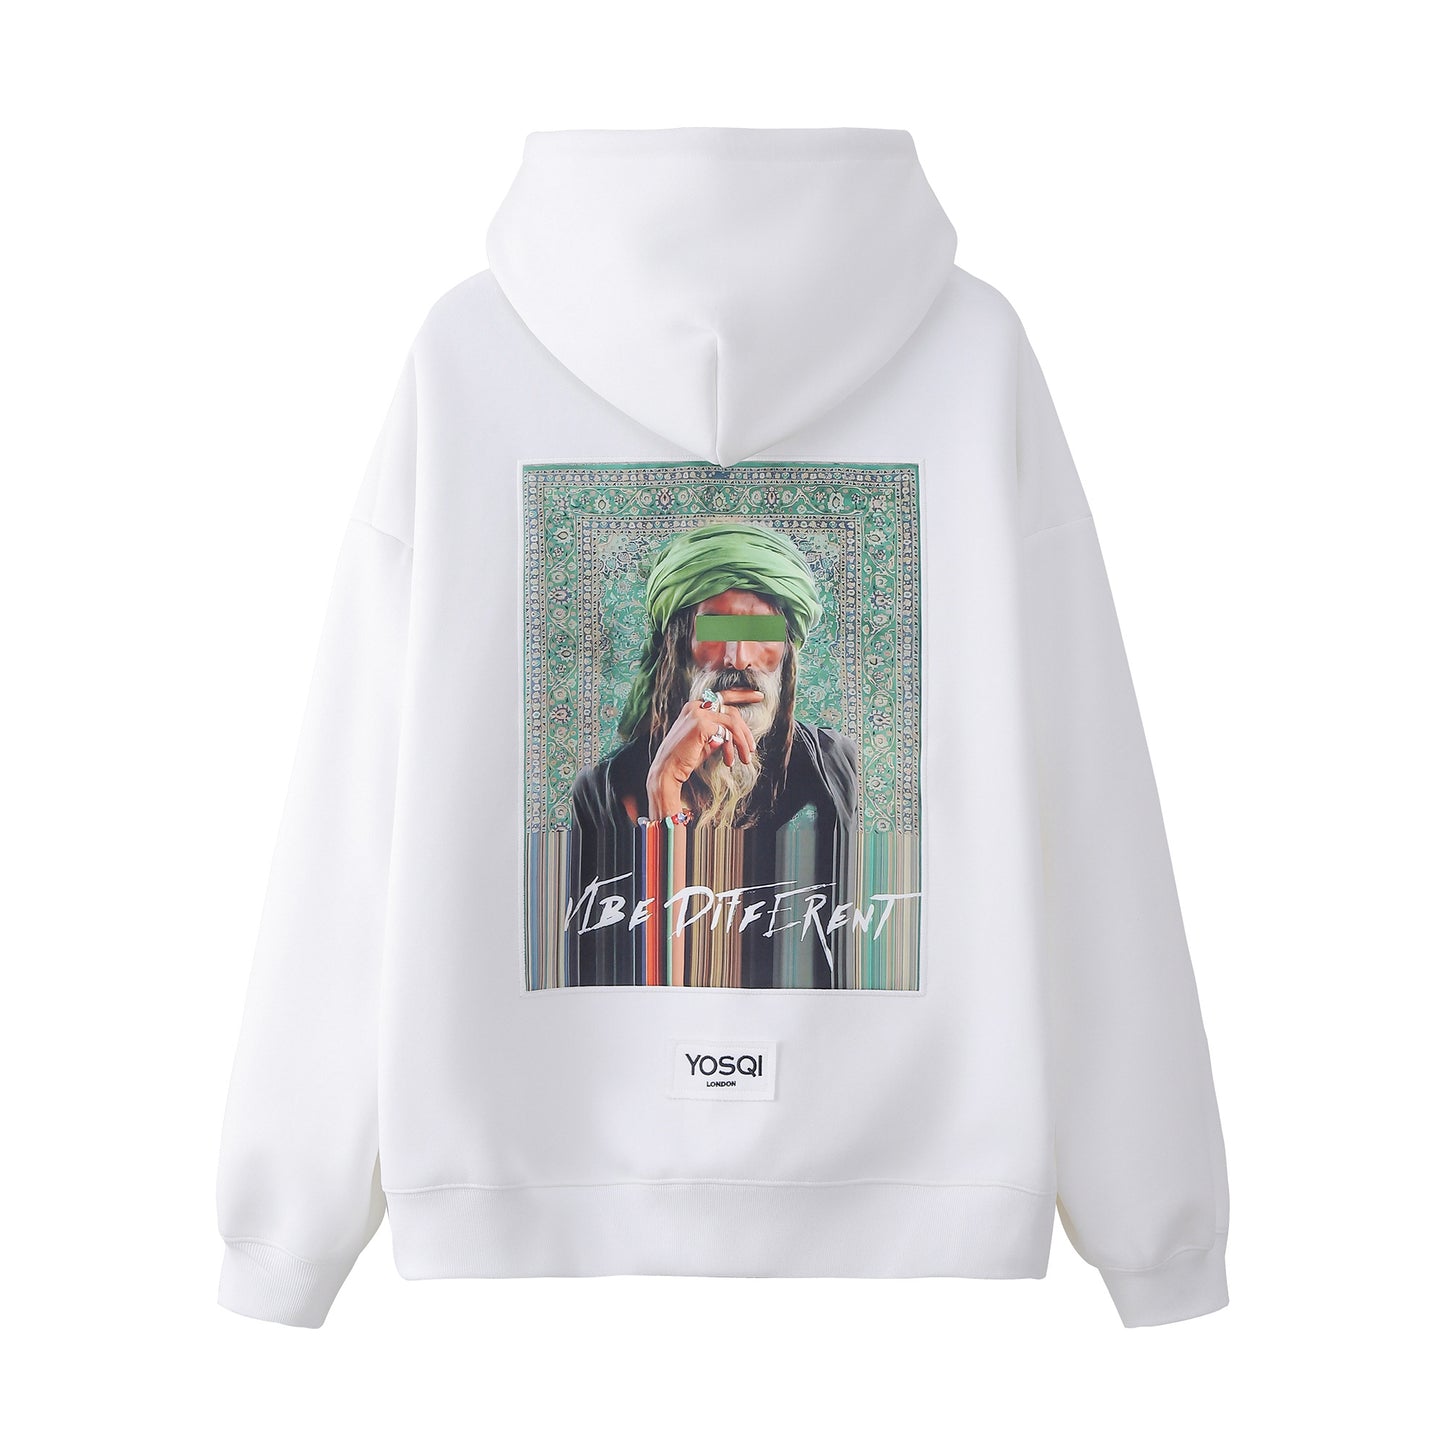 213-YOSQI "Vibe Different" Patch Oversized White Hoodie